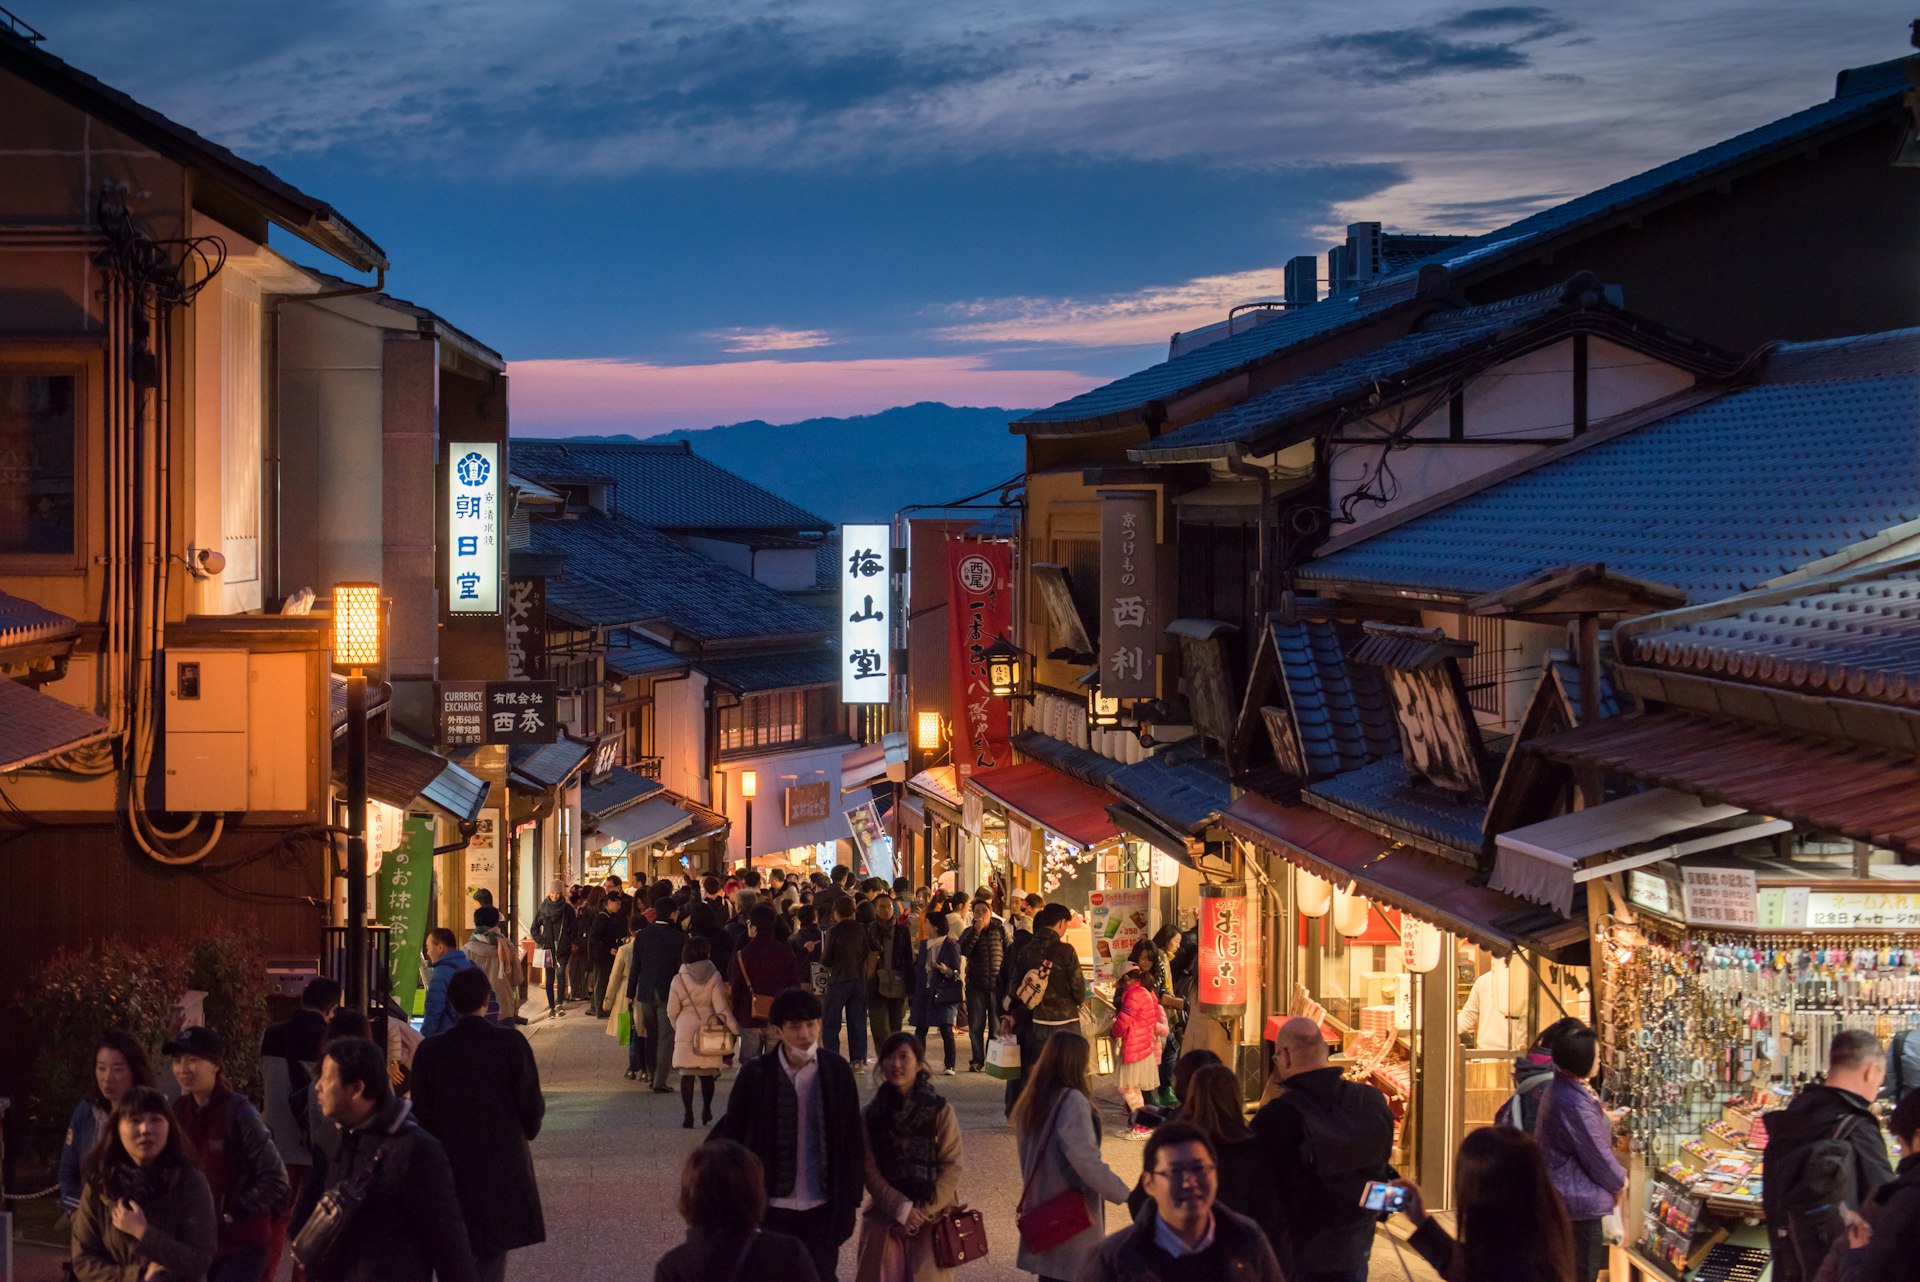 People walk down a steep street among shops with mountains in the distance, Gion district, Kyoto, Japan